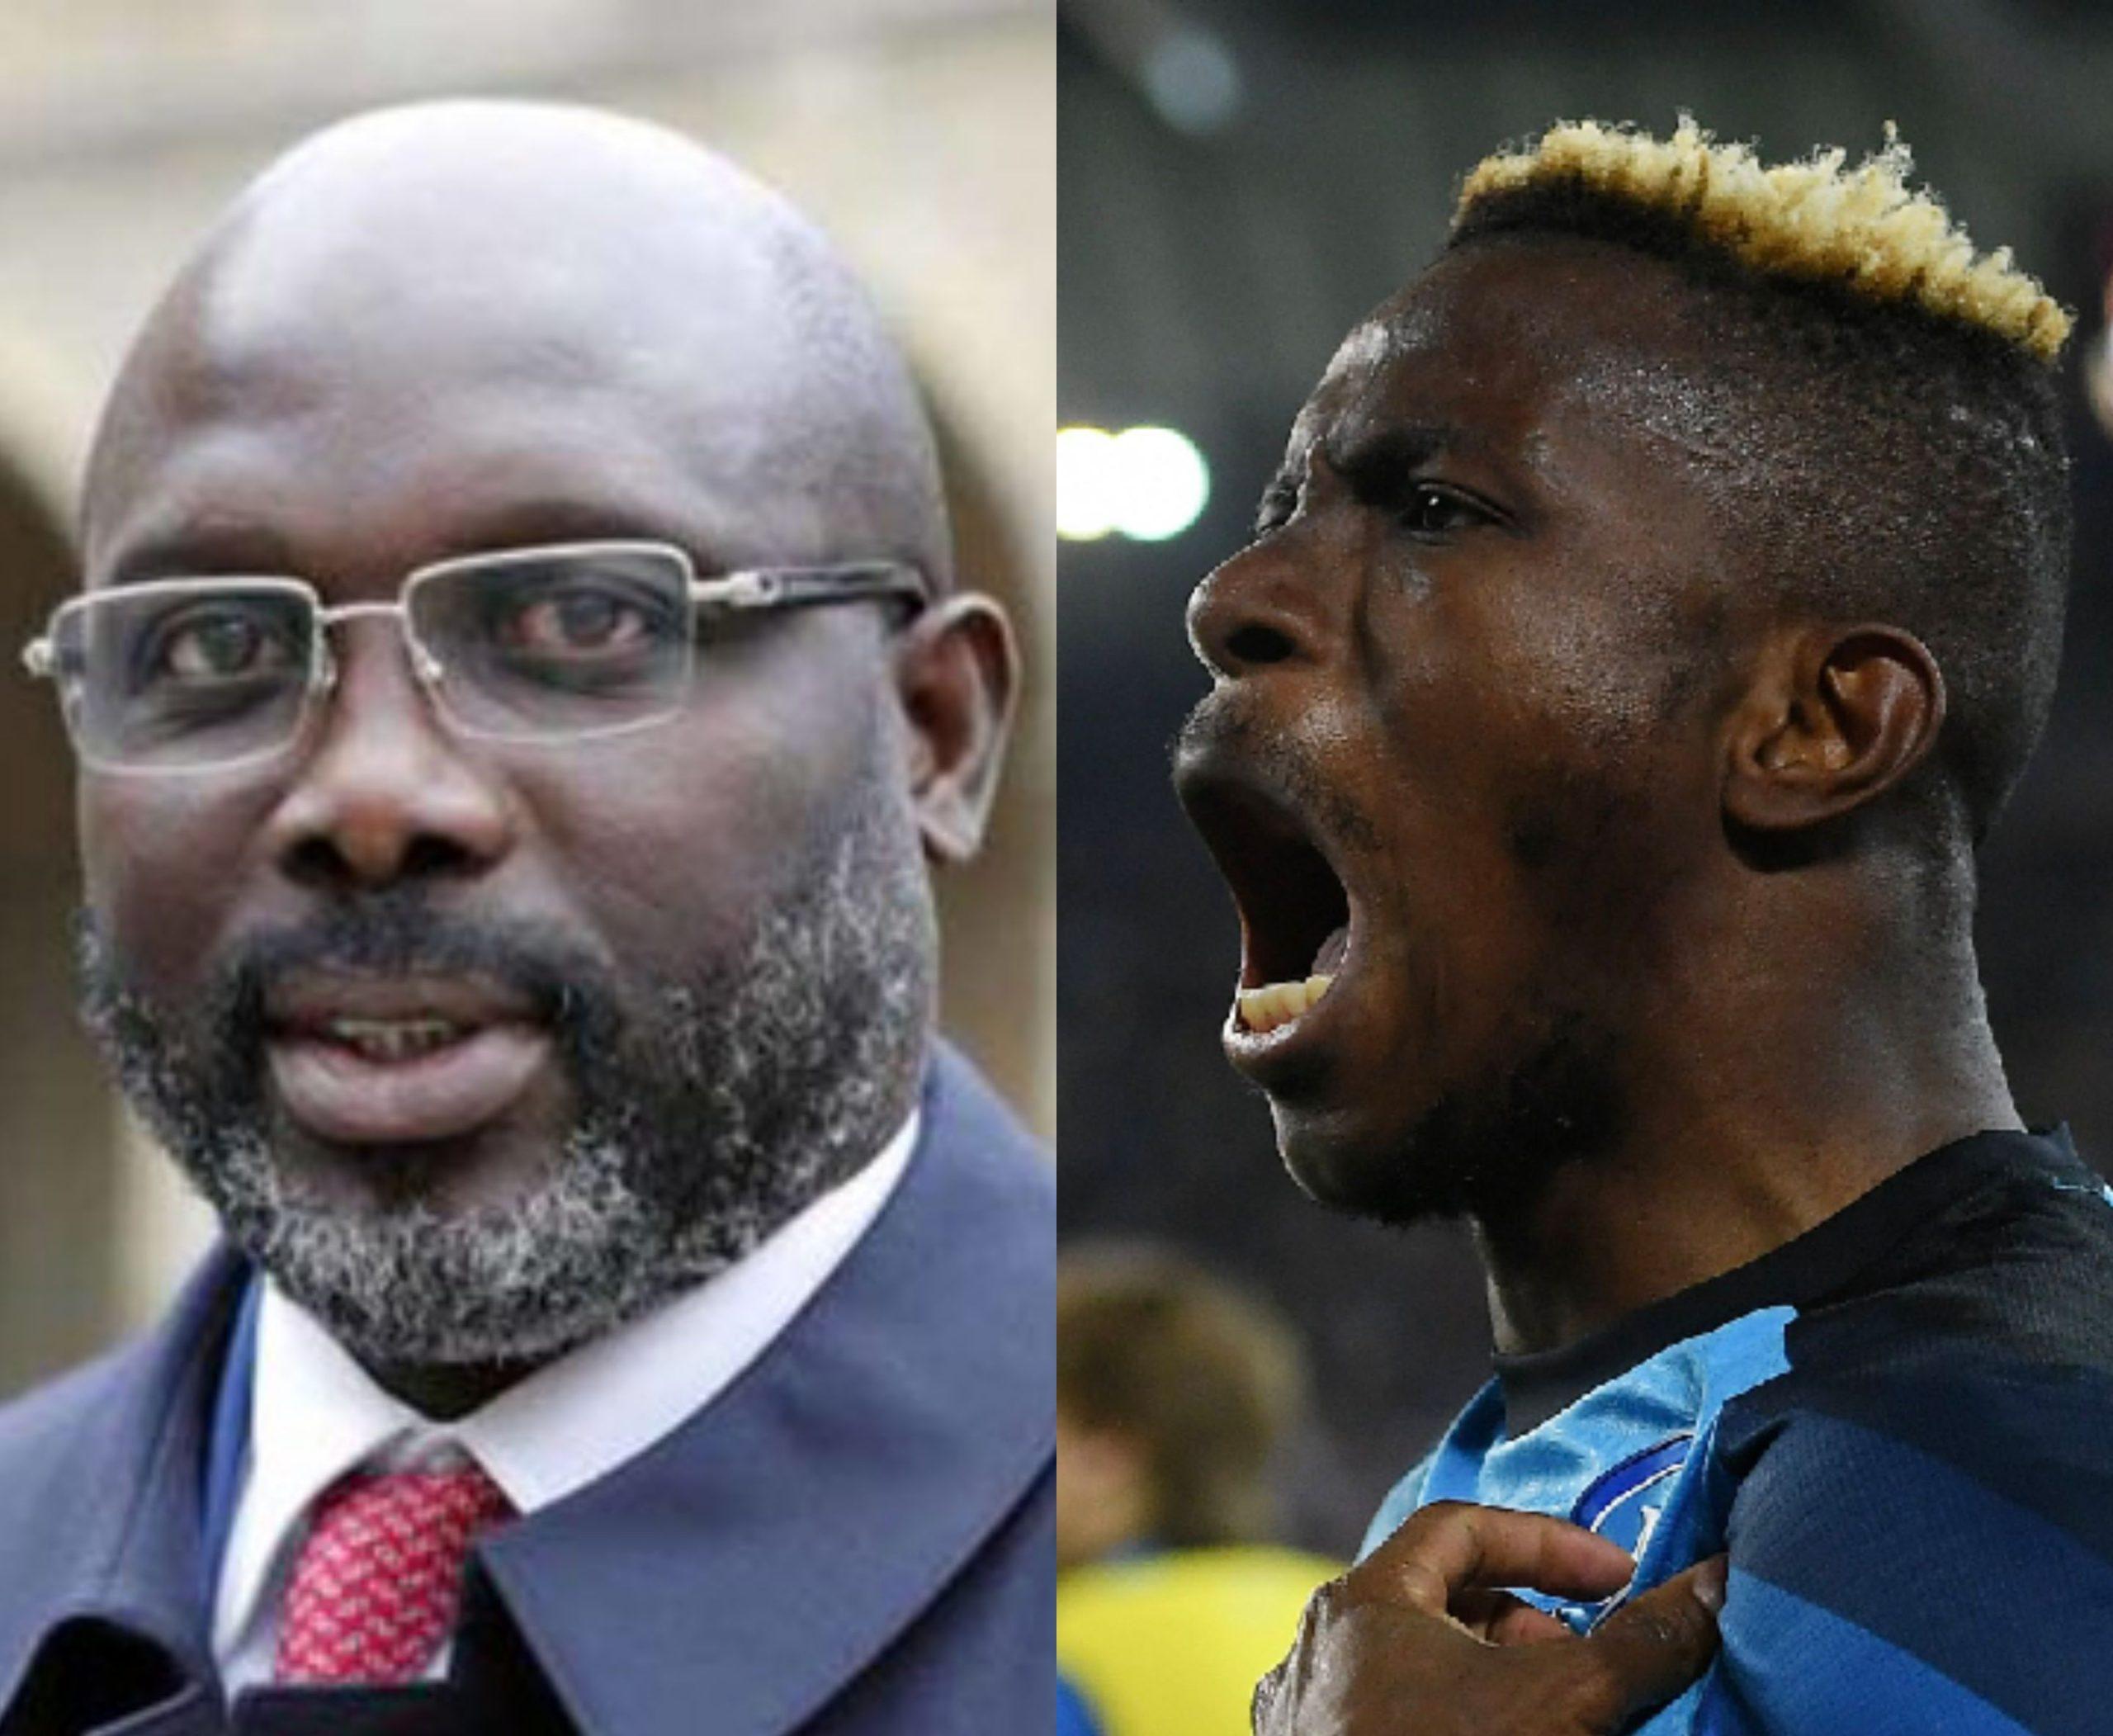 “I’m rooting for you Victor”-now Liberia President sends heartfelt message to Osimhen